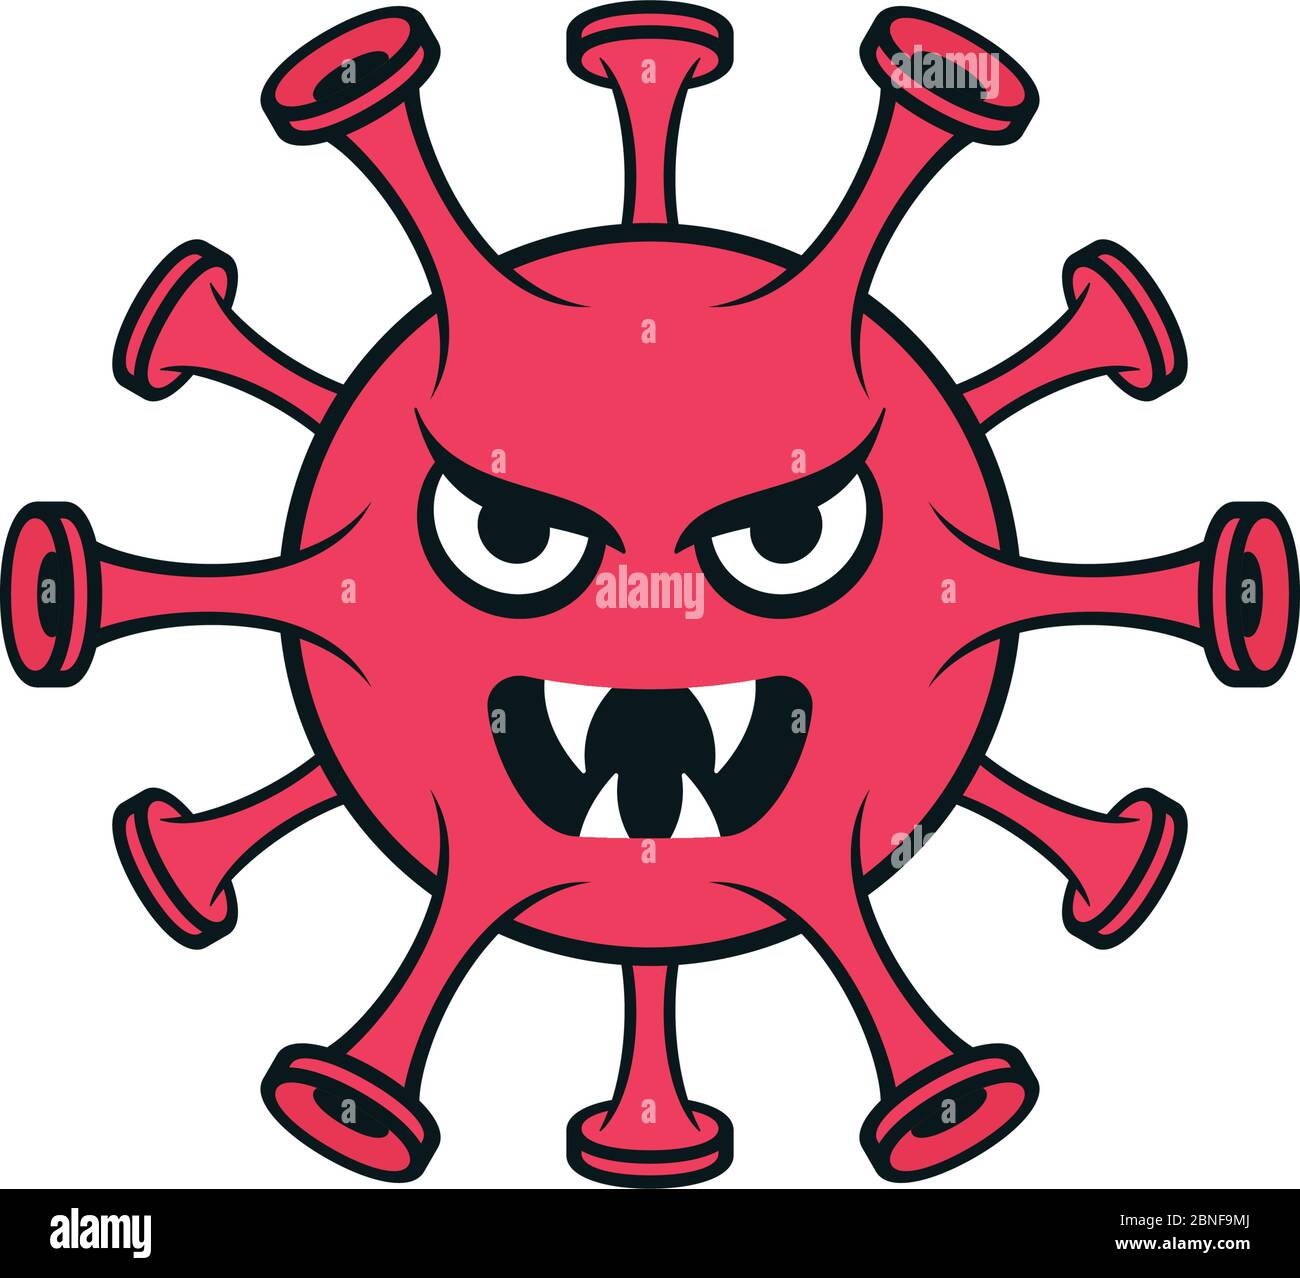 Corona Covid-19 Virus Monster With A Scary Face PNG Images